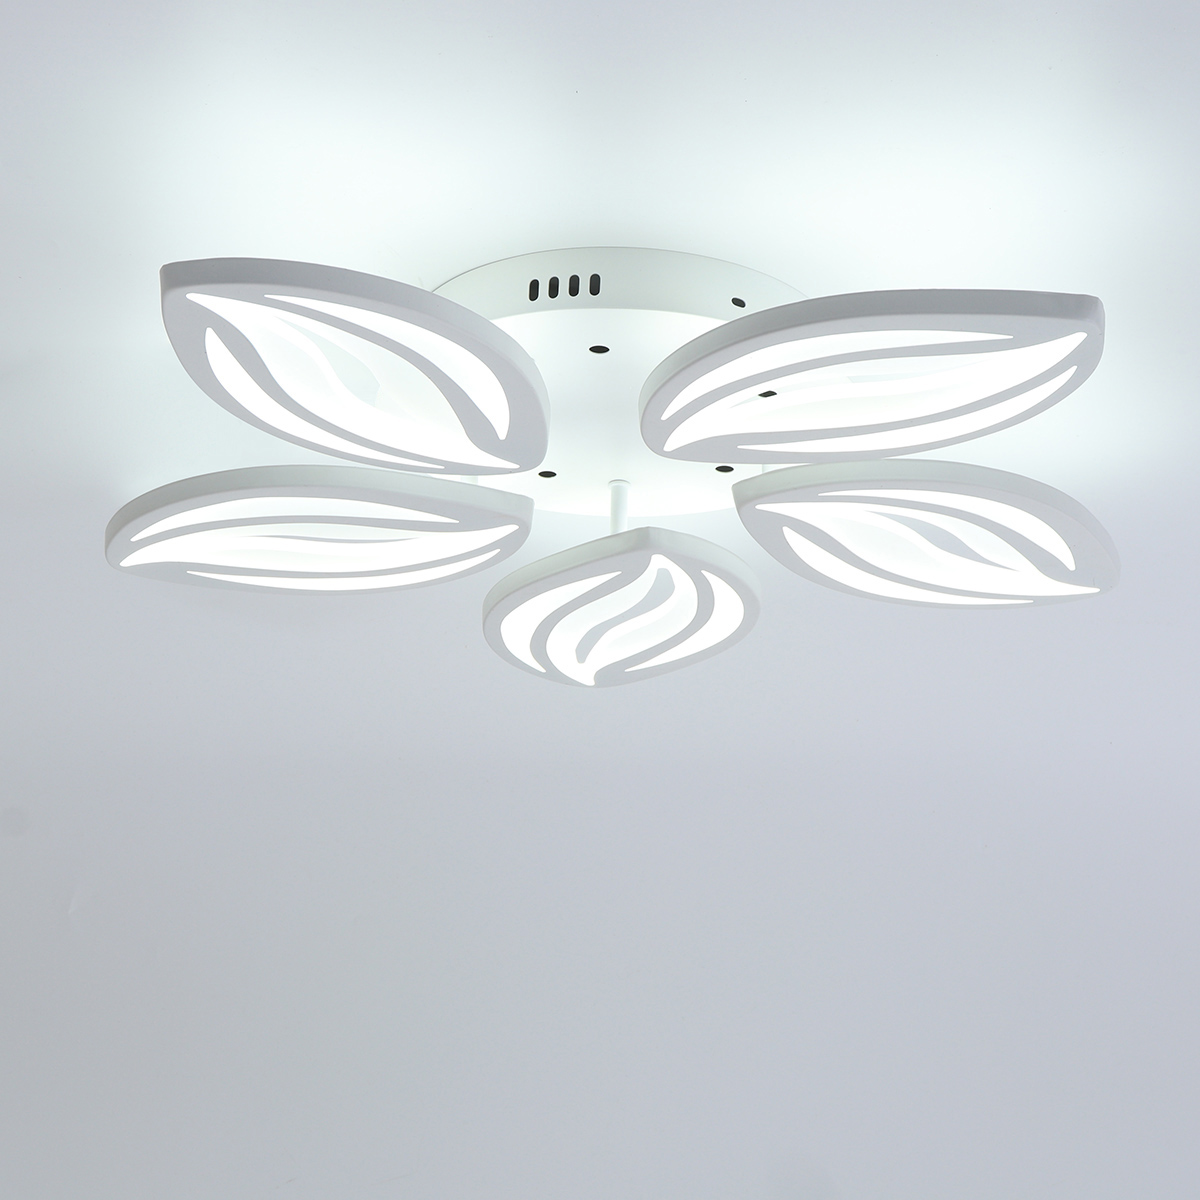 AC110-220V-6000LM-550LED-Ceiling-Light-Fixture-Lamp-Remote-Control-Bedroom-Study-Parlor-1807229-9